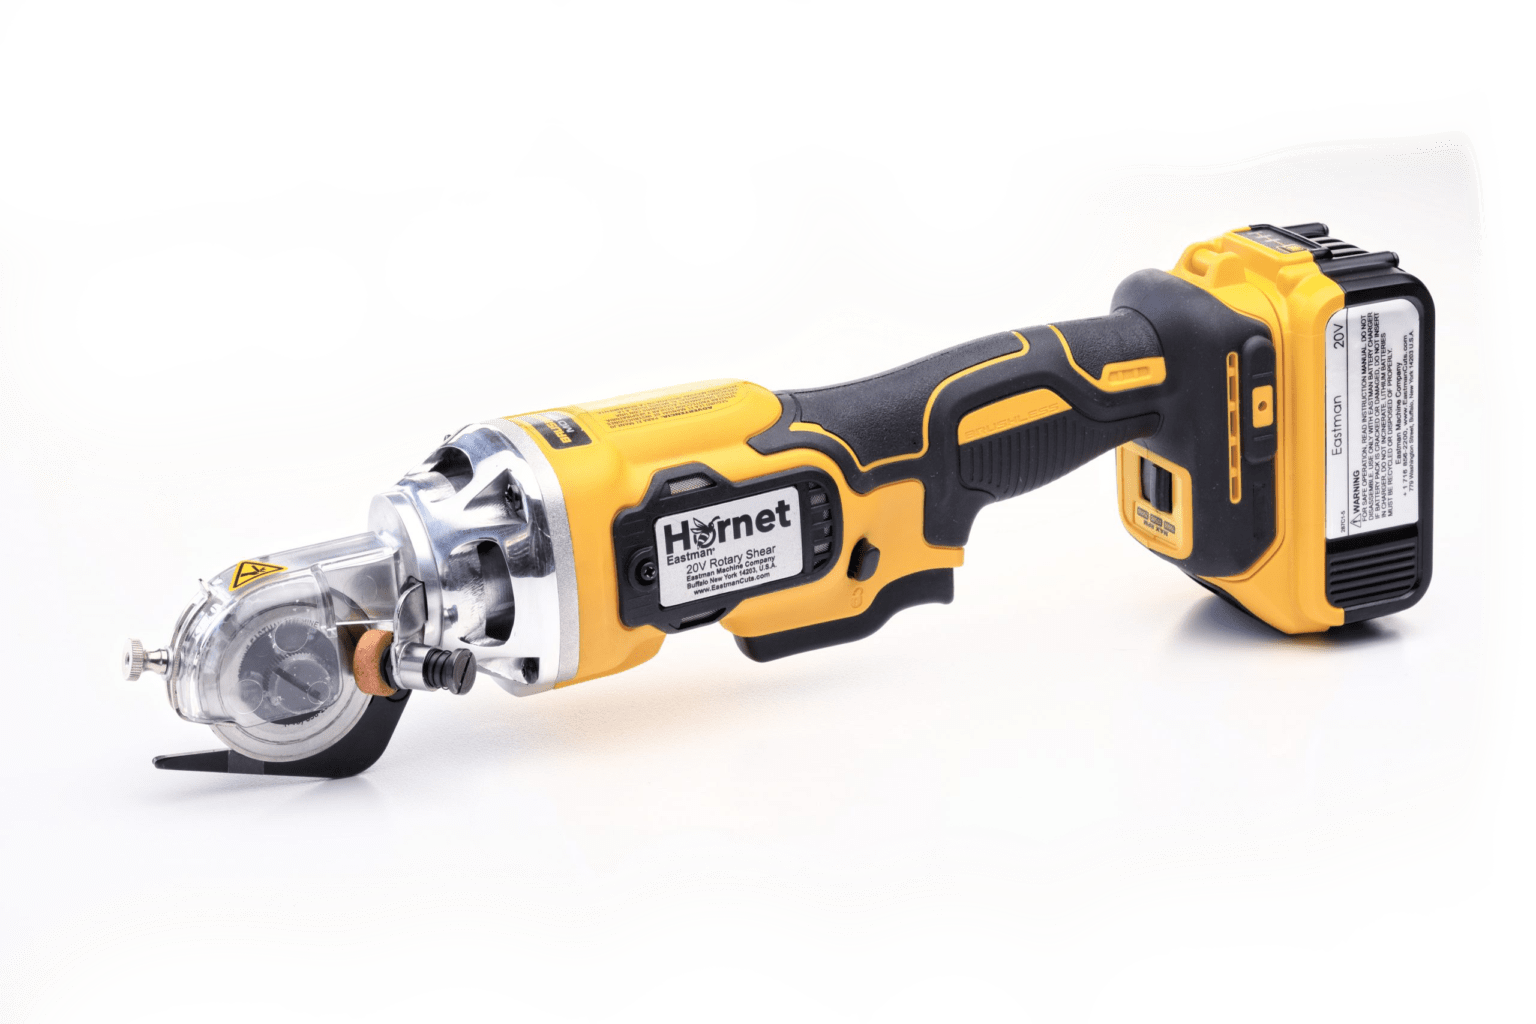 EASTMAN Hornet
MODEL HRNT – The Hornet is a powerful, rechargeable, professional-grade cordless power tool.